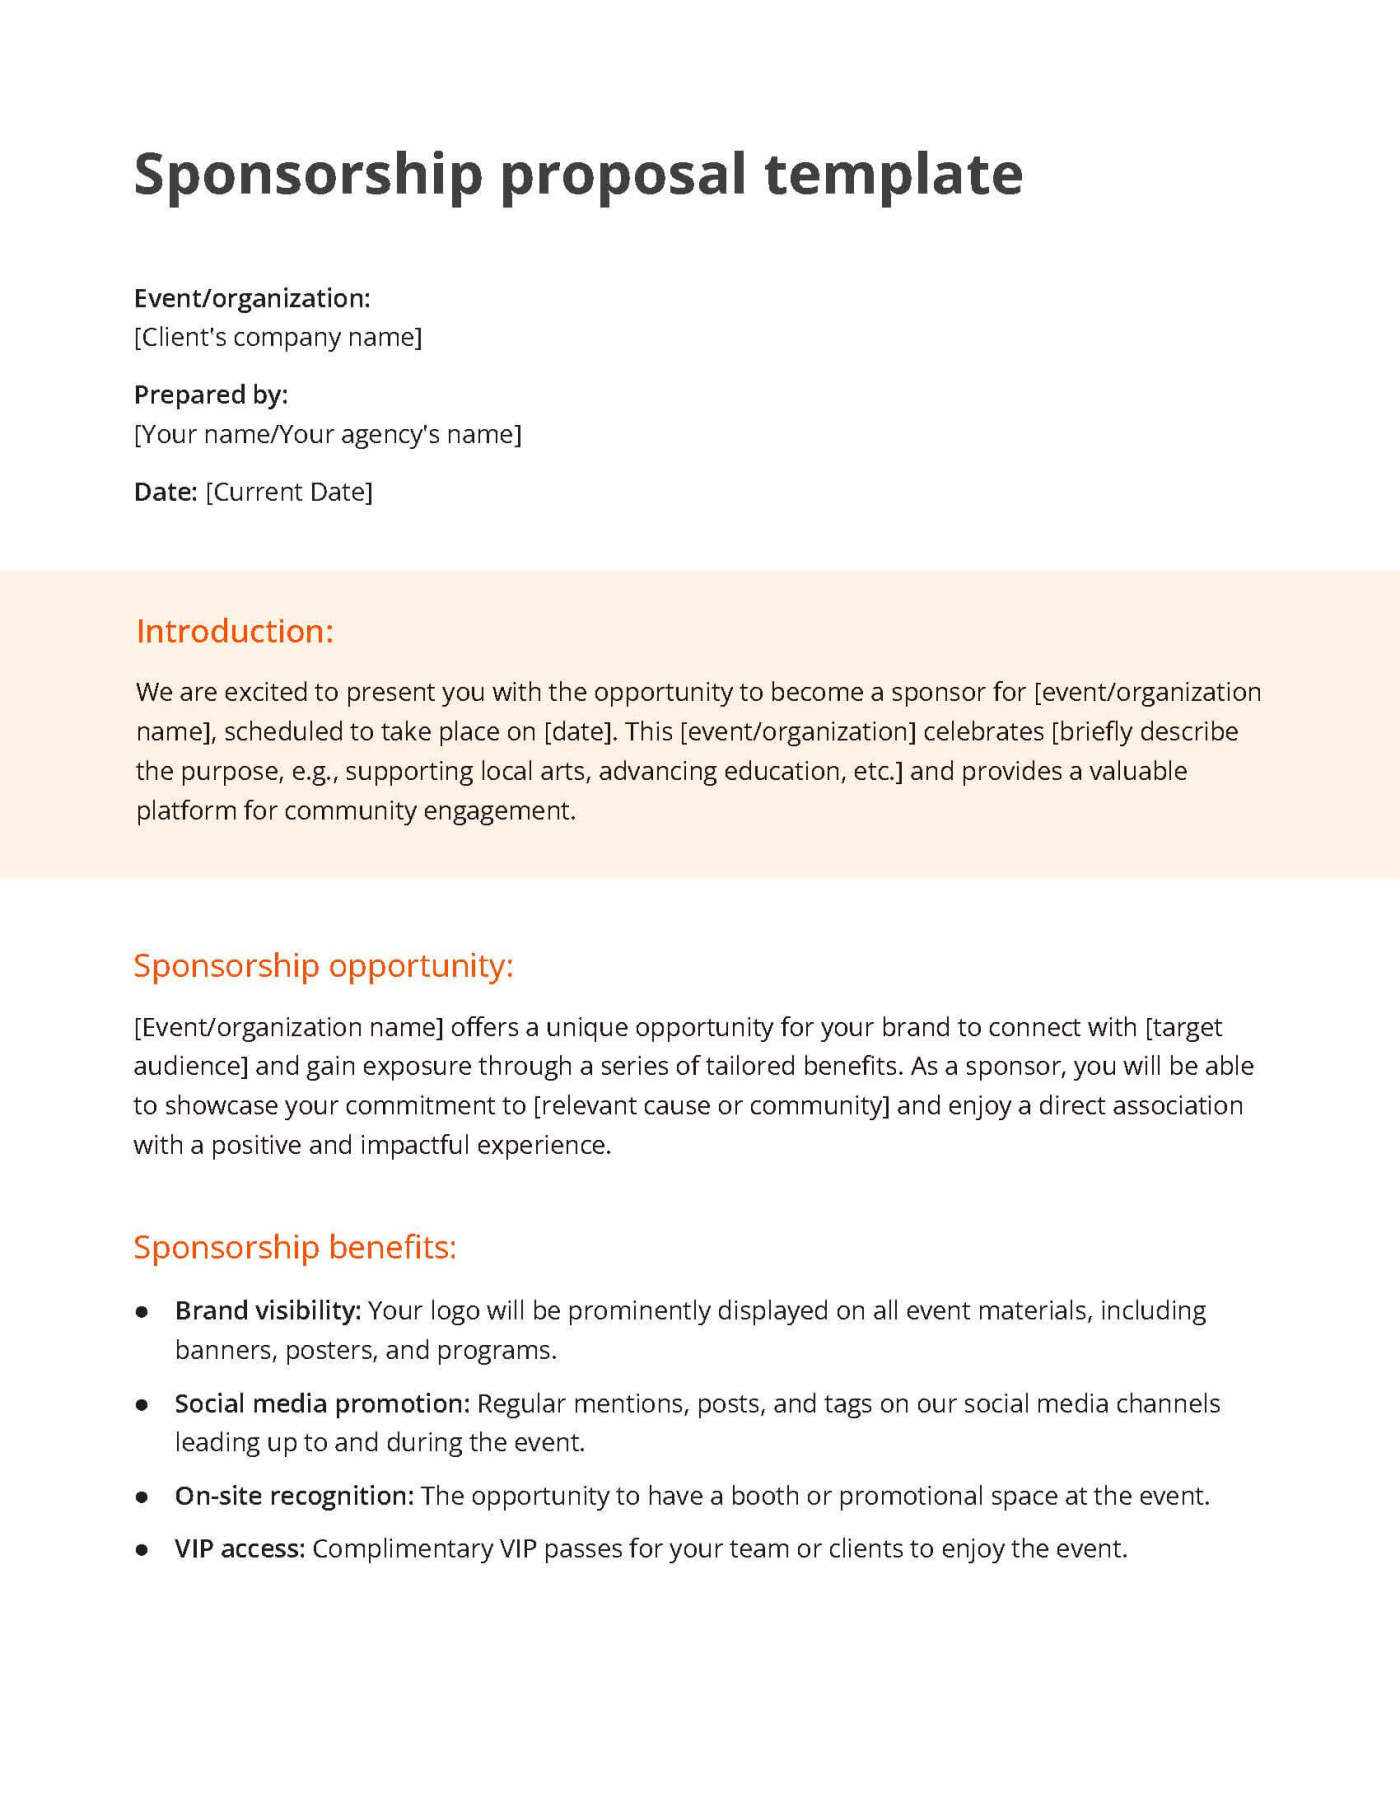 White and orange sponsorship proposal template including a section for the introduction, sponsorship opportunity and sponsorship benefits